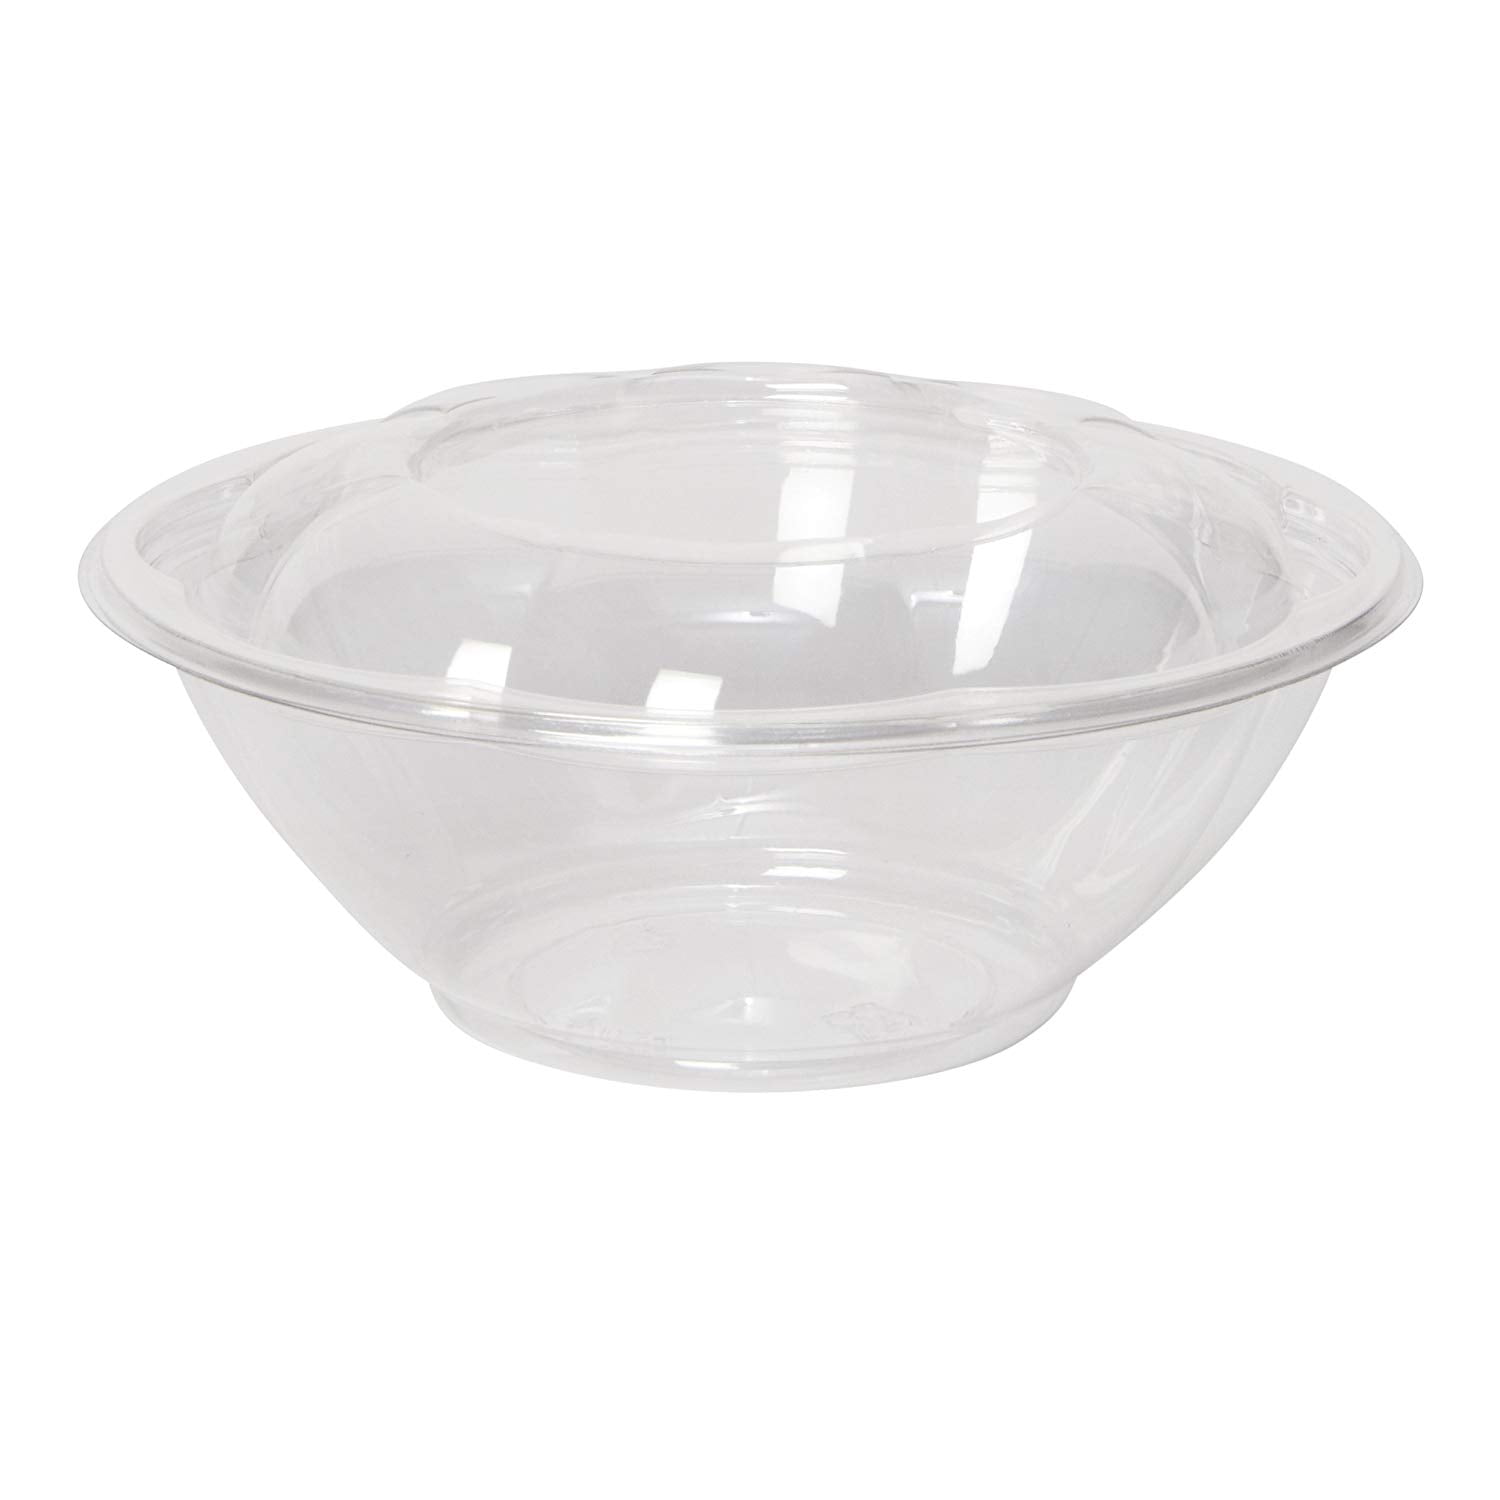 50-Pack 24oz Plastic Disposable Salad Bowls with Lids - Eco-Friendly Clear Food  Containers - Extra-Thick Materials - Portable Serving Bowl Set to Pack  Lunch - S…